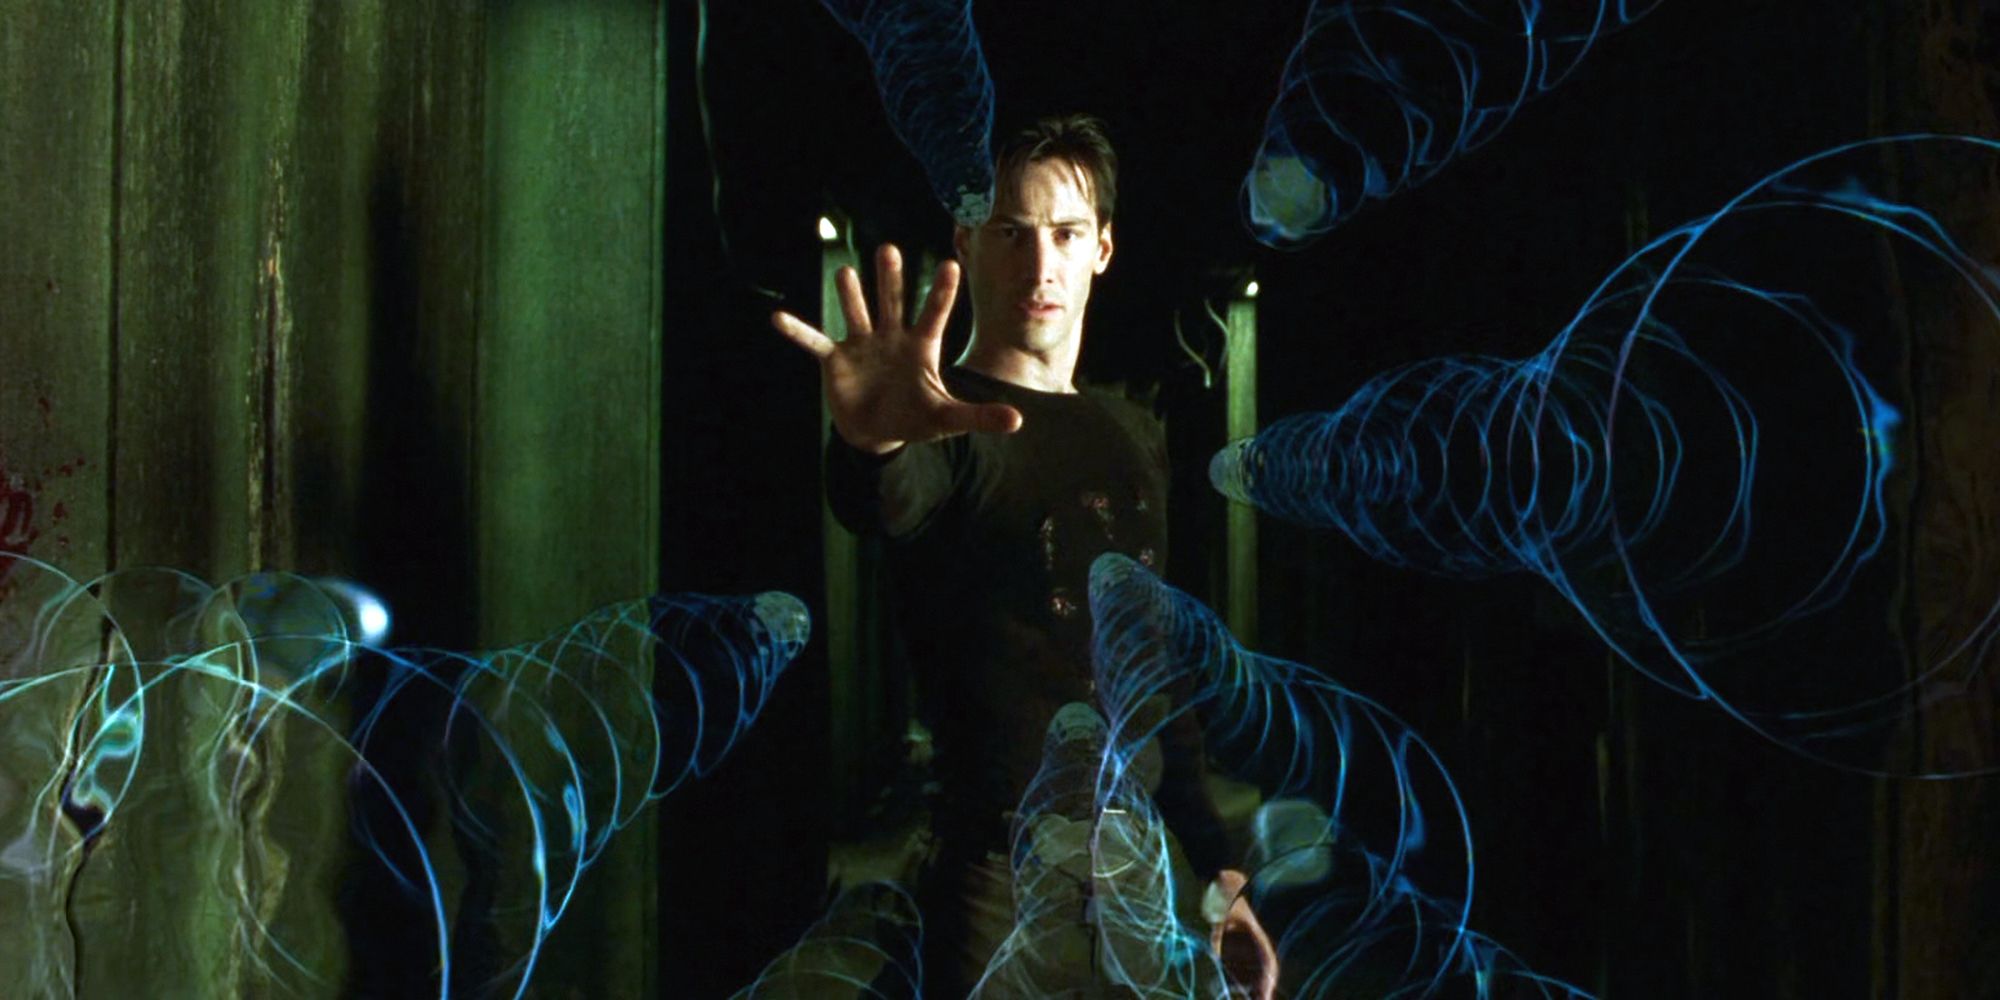 Neo stopping bullets in 'The Matrix'